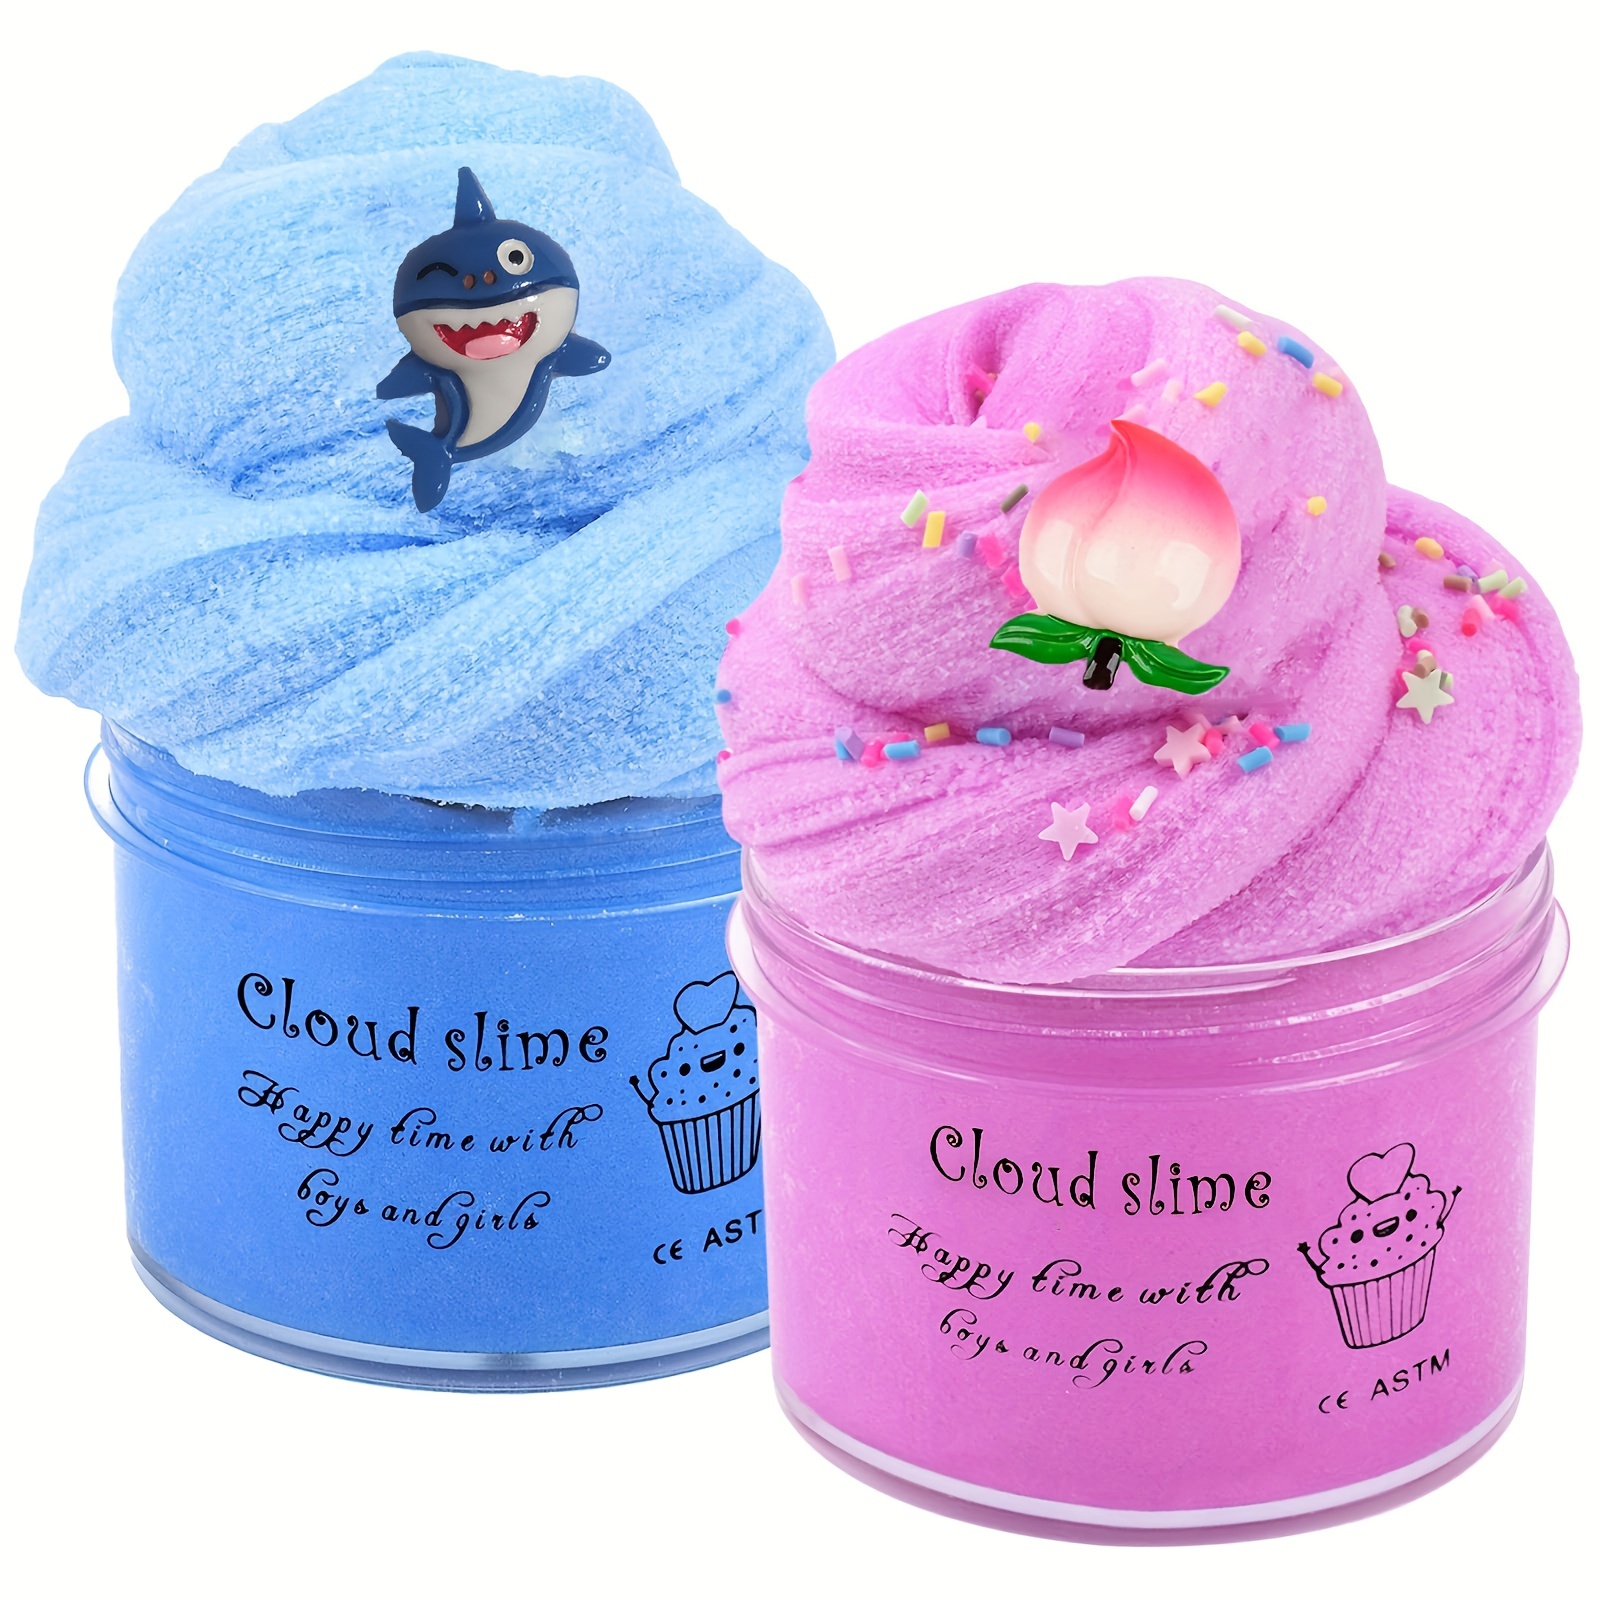 Slime Kit Stress Relief Toys, Stress Relief Toy